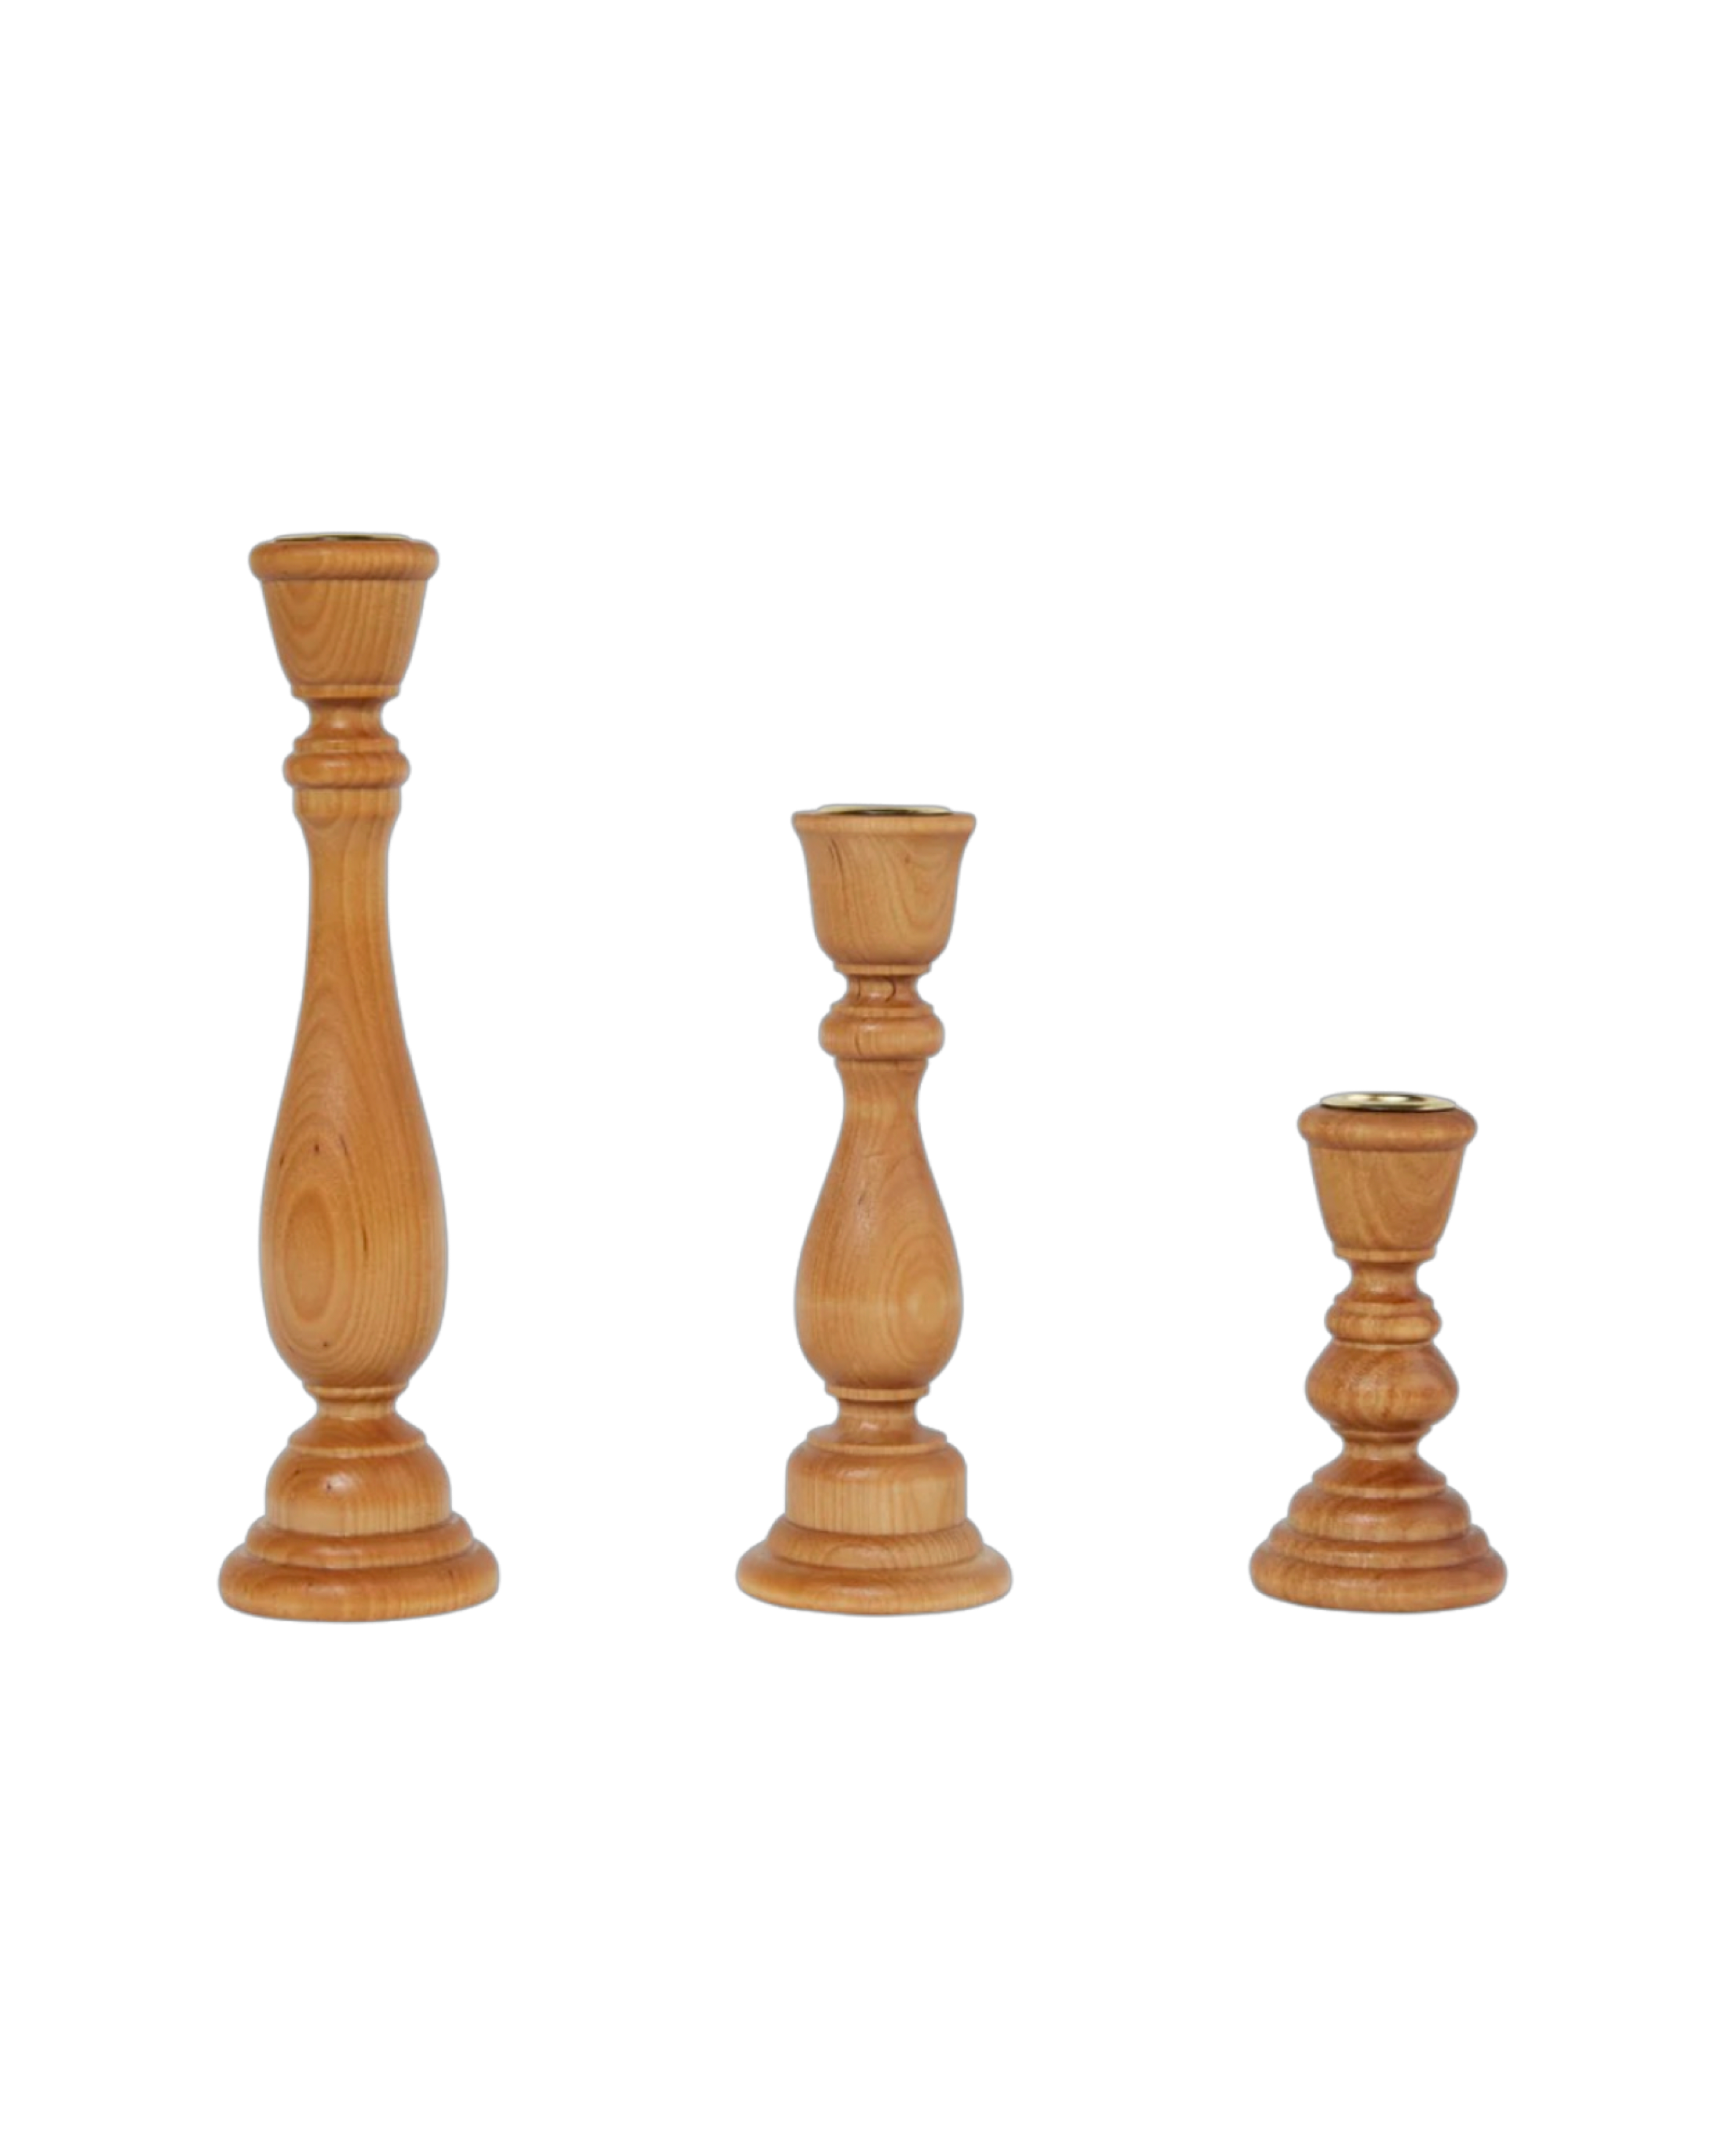 Oil-stained Wooden Candlestick Trio